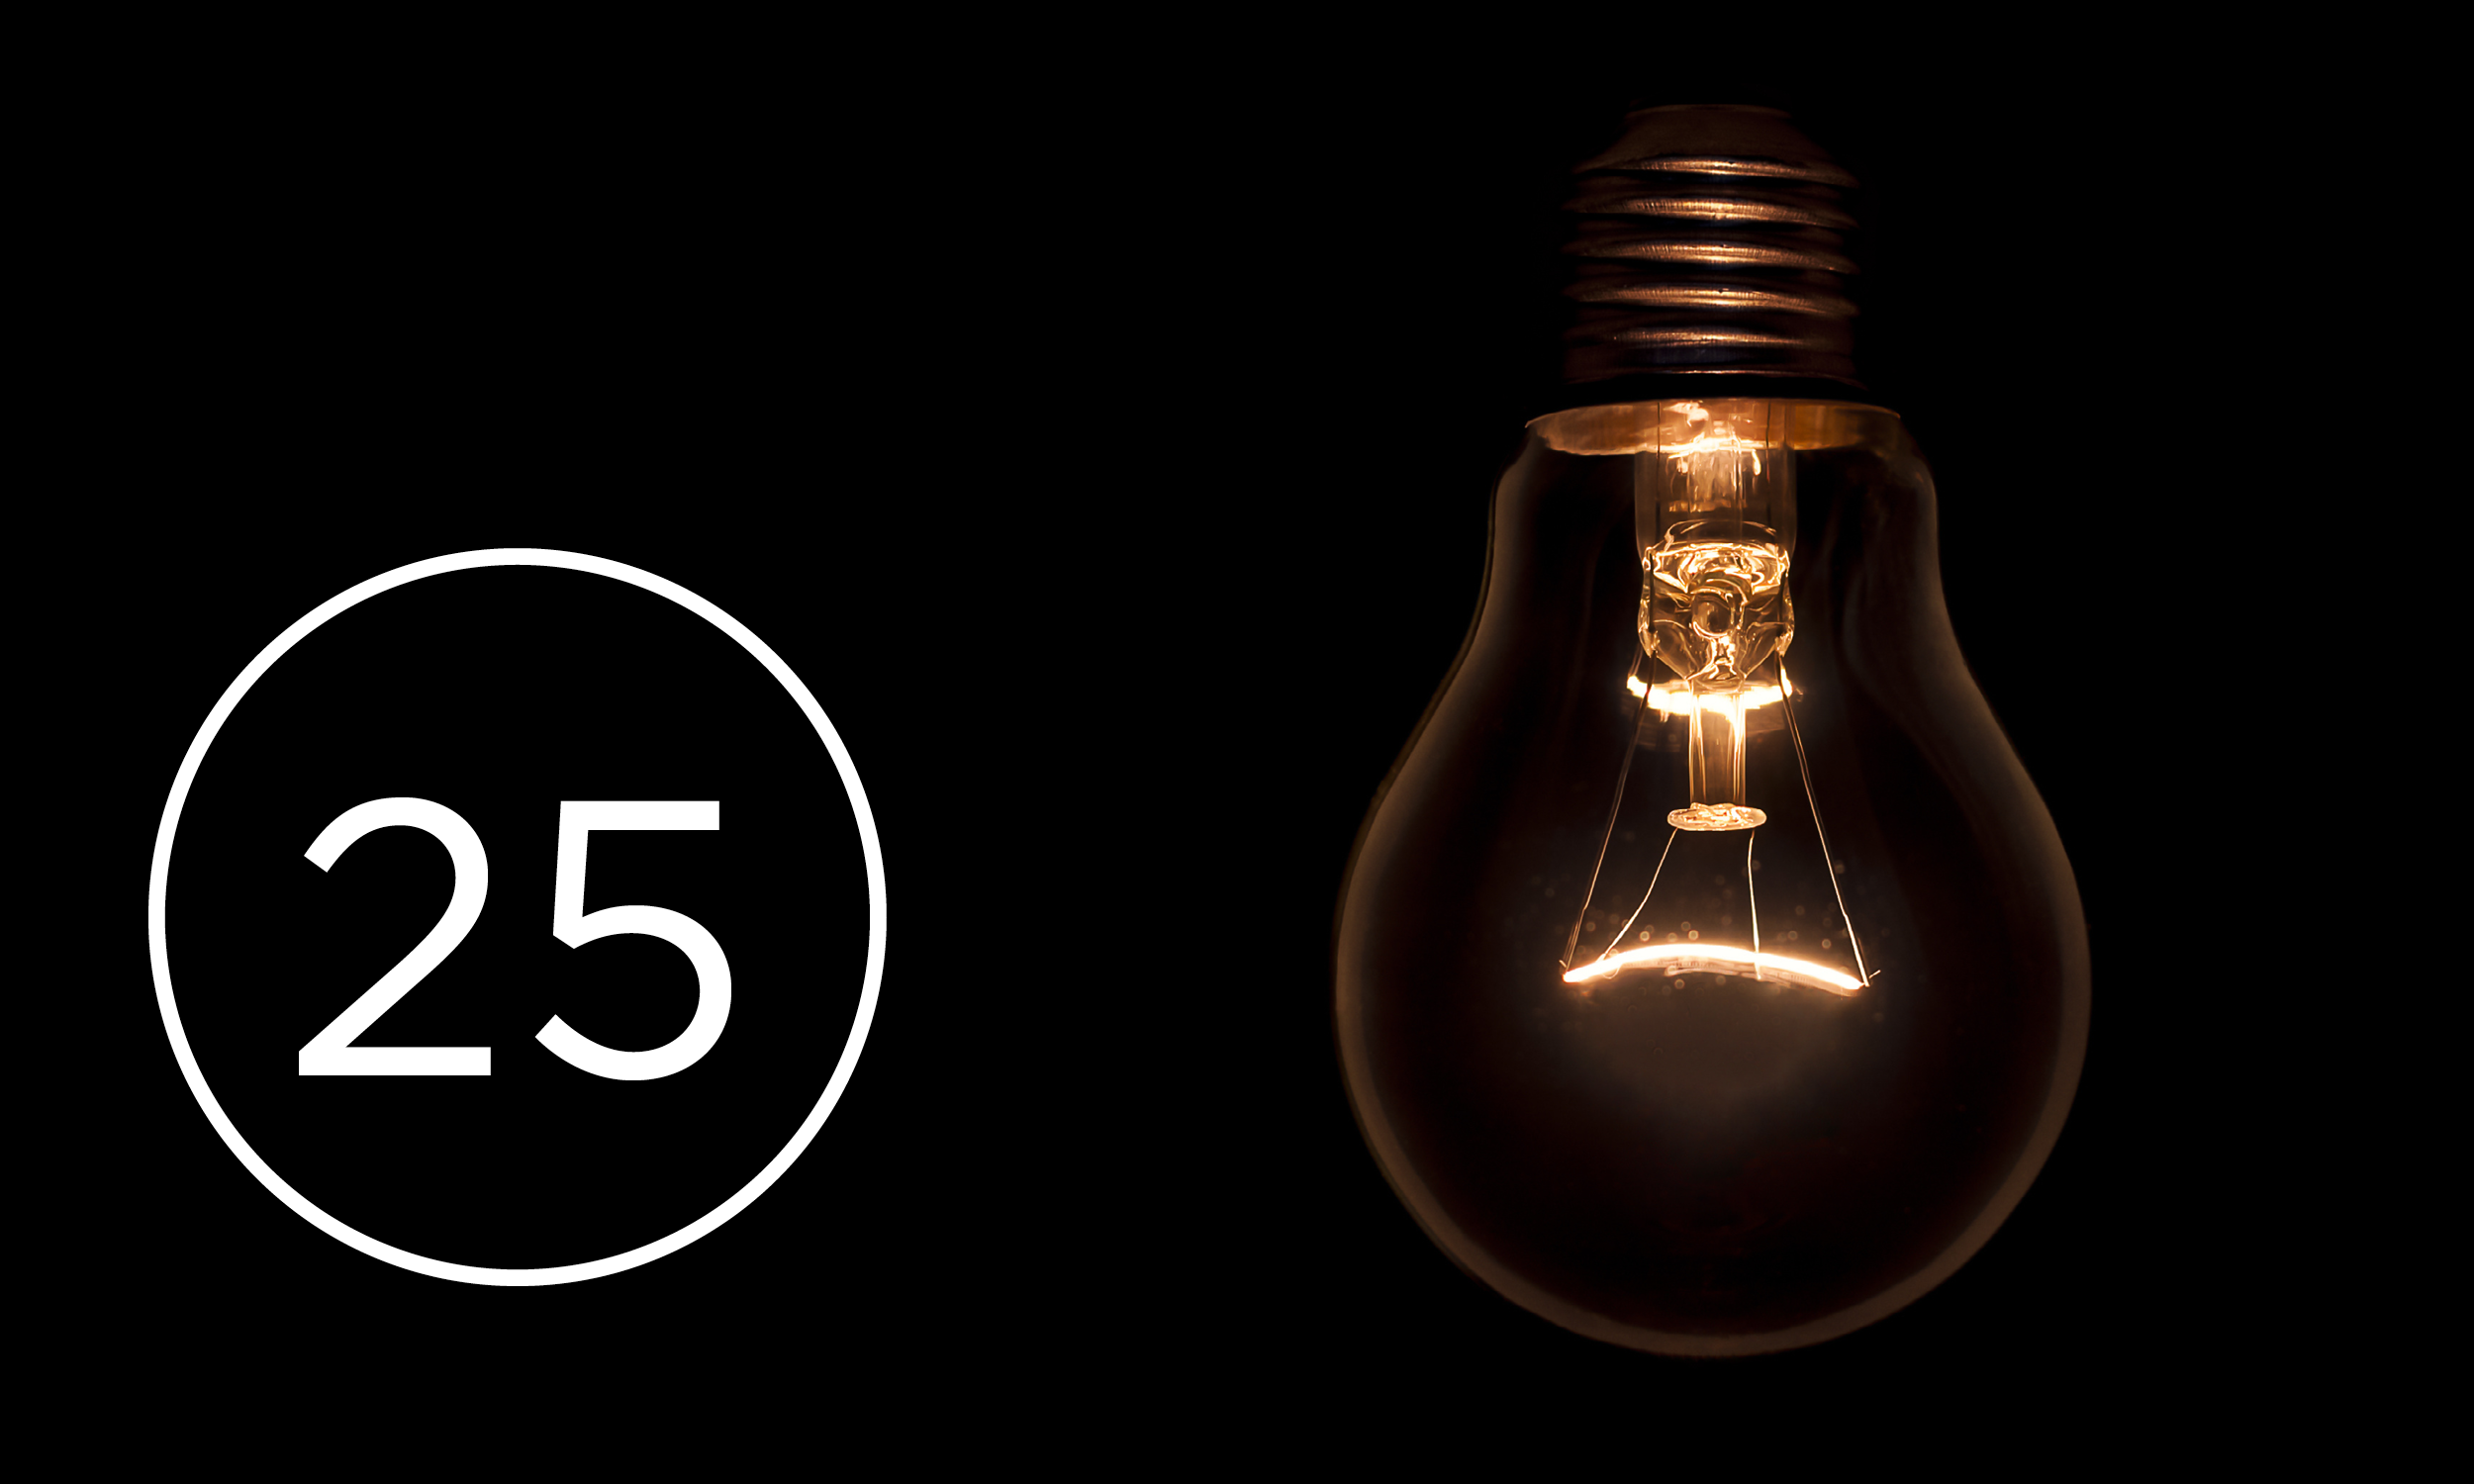 Lightbulb with number 25